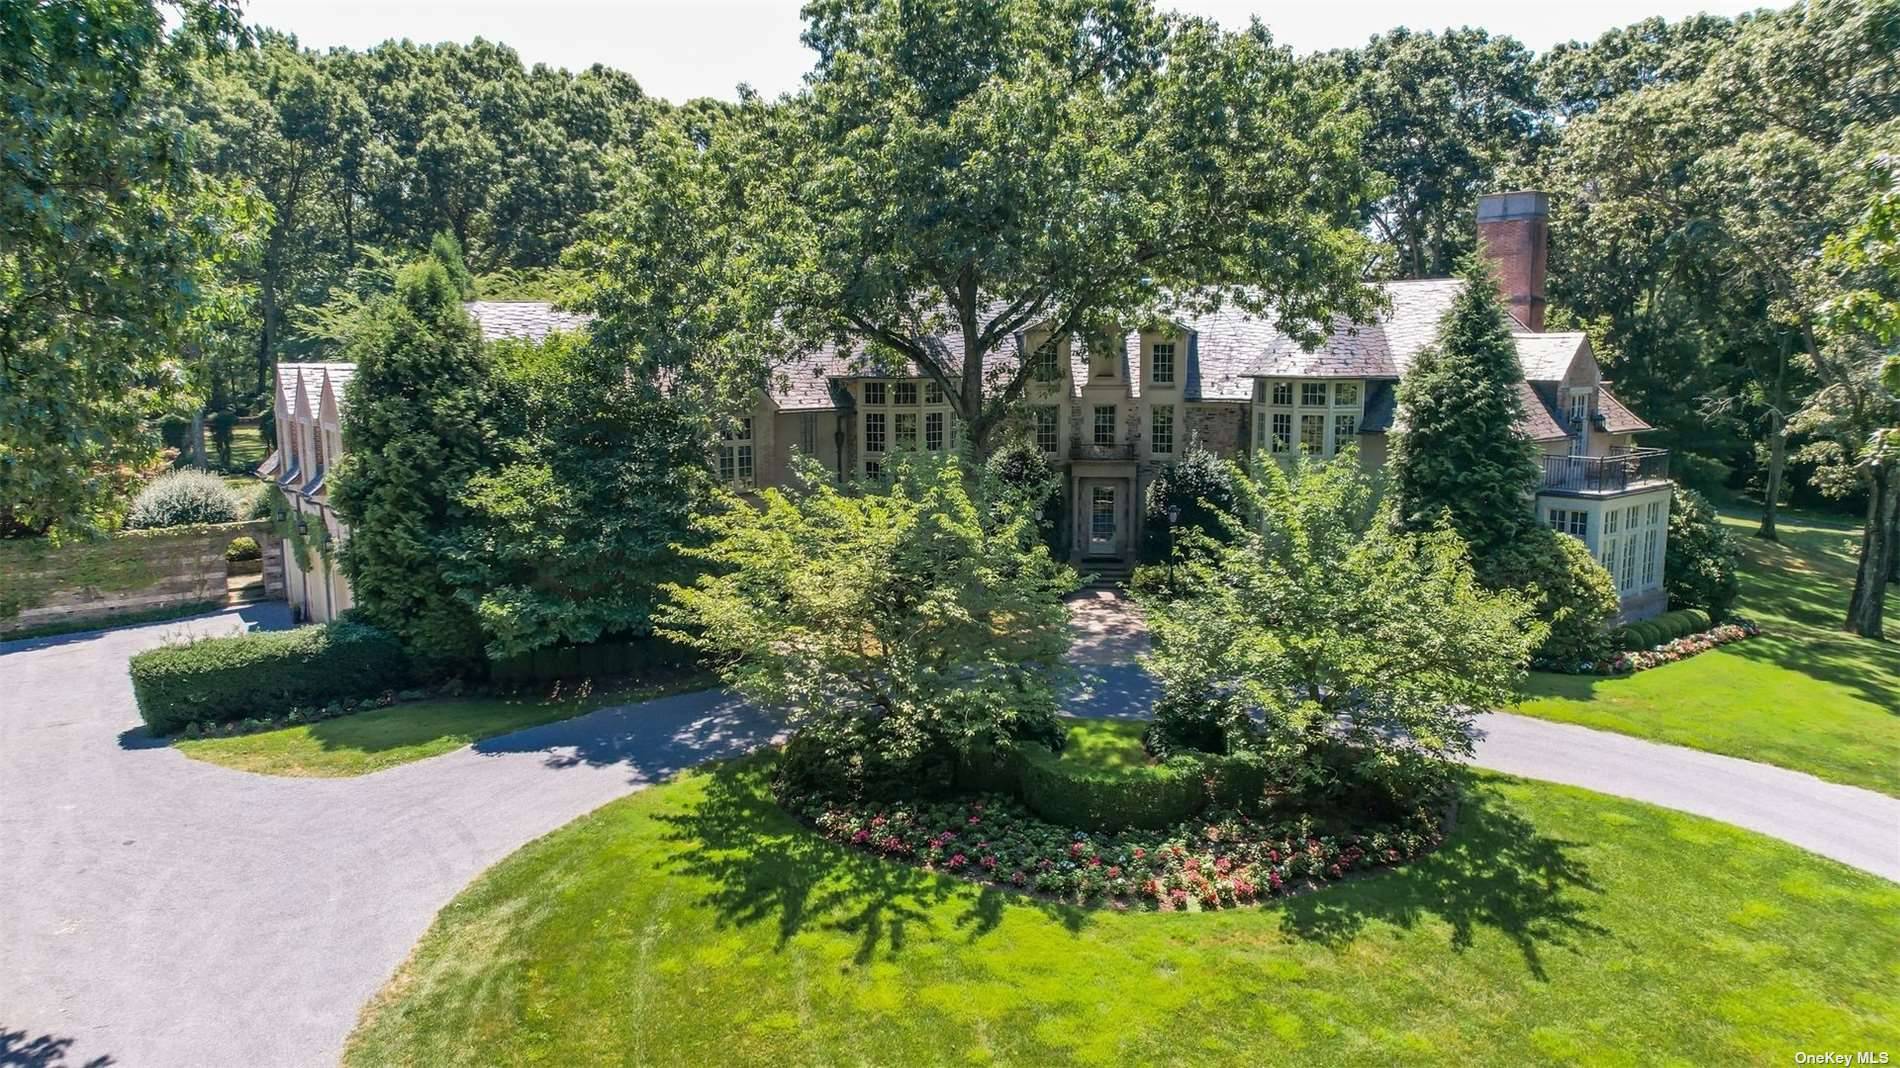 Located in the prestigious Village of Upper Brookville, this impressive estate is incredibly designed and offers the utmost luxury living just 27 miles east of Manhattan.